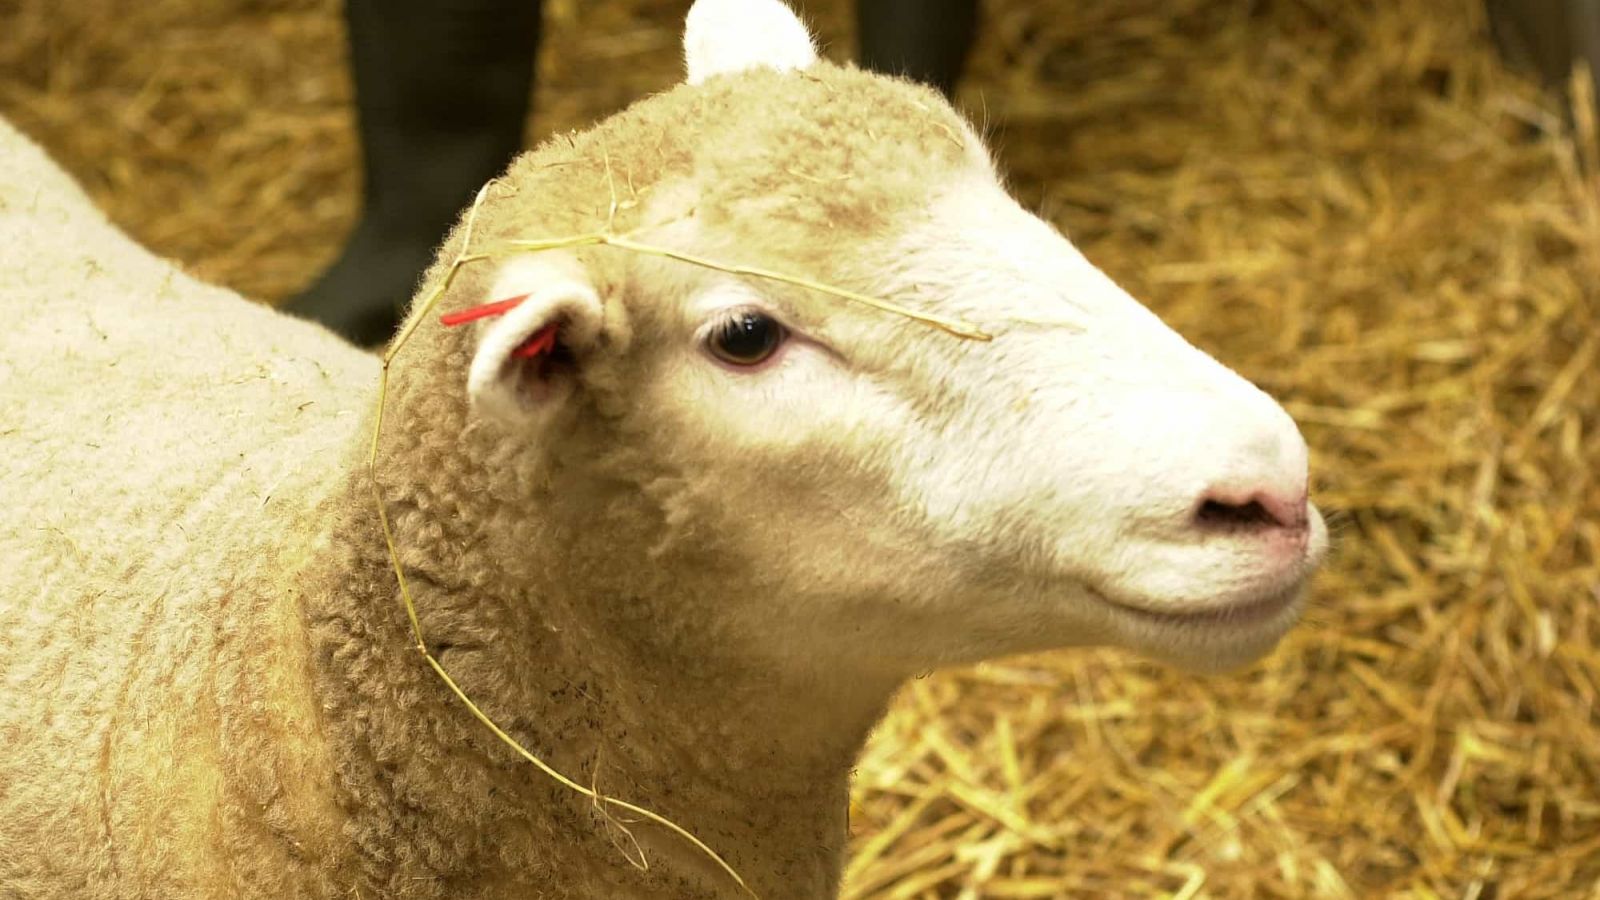 Sheep in medical research